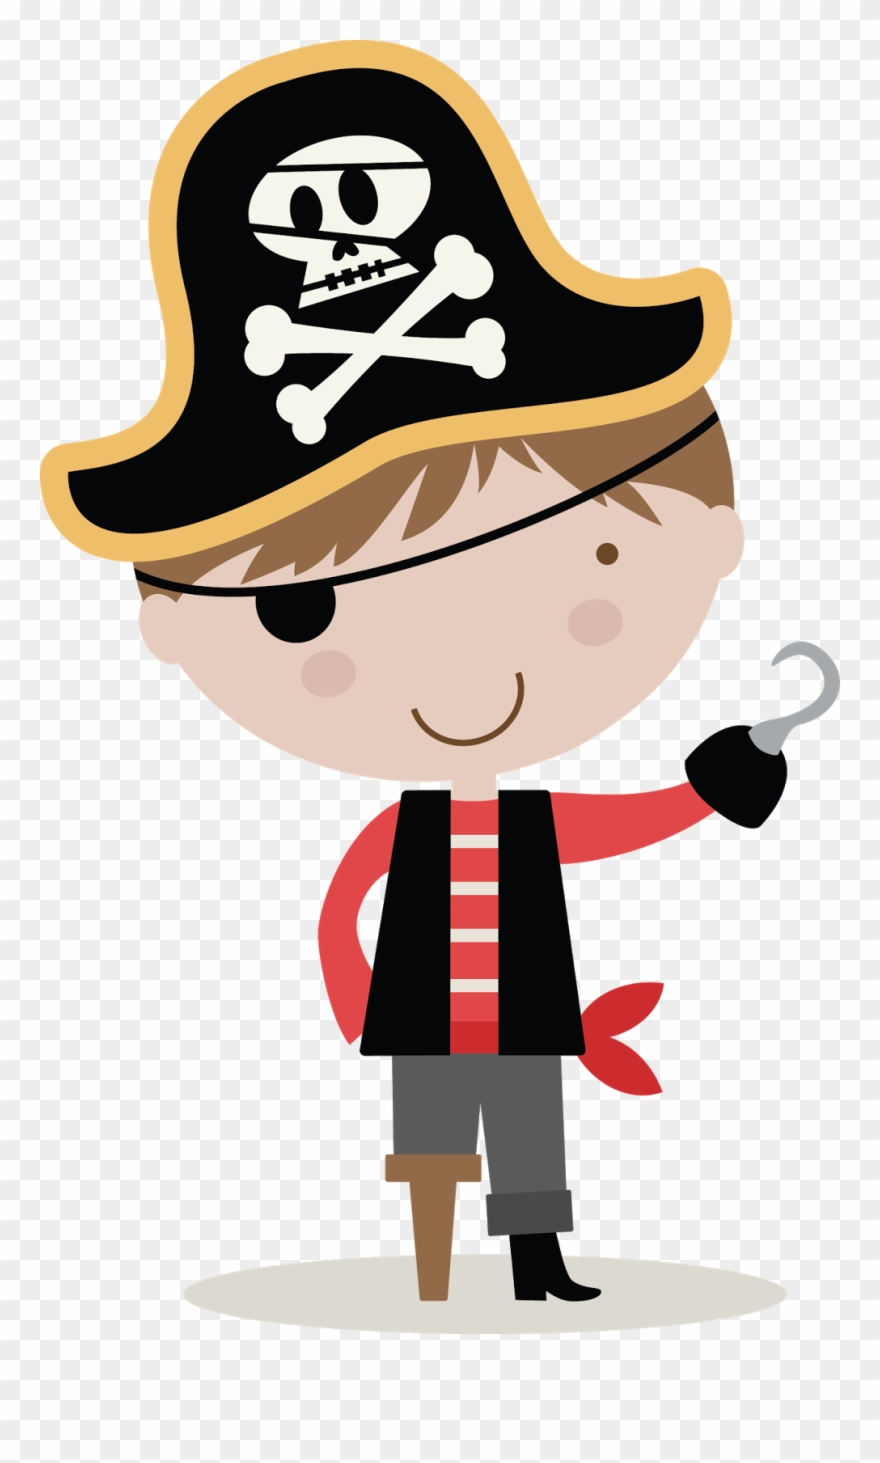 Security Kid Pirate Pictures Pirates Kids Clip.